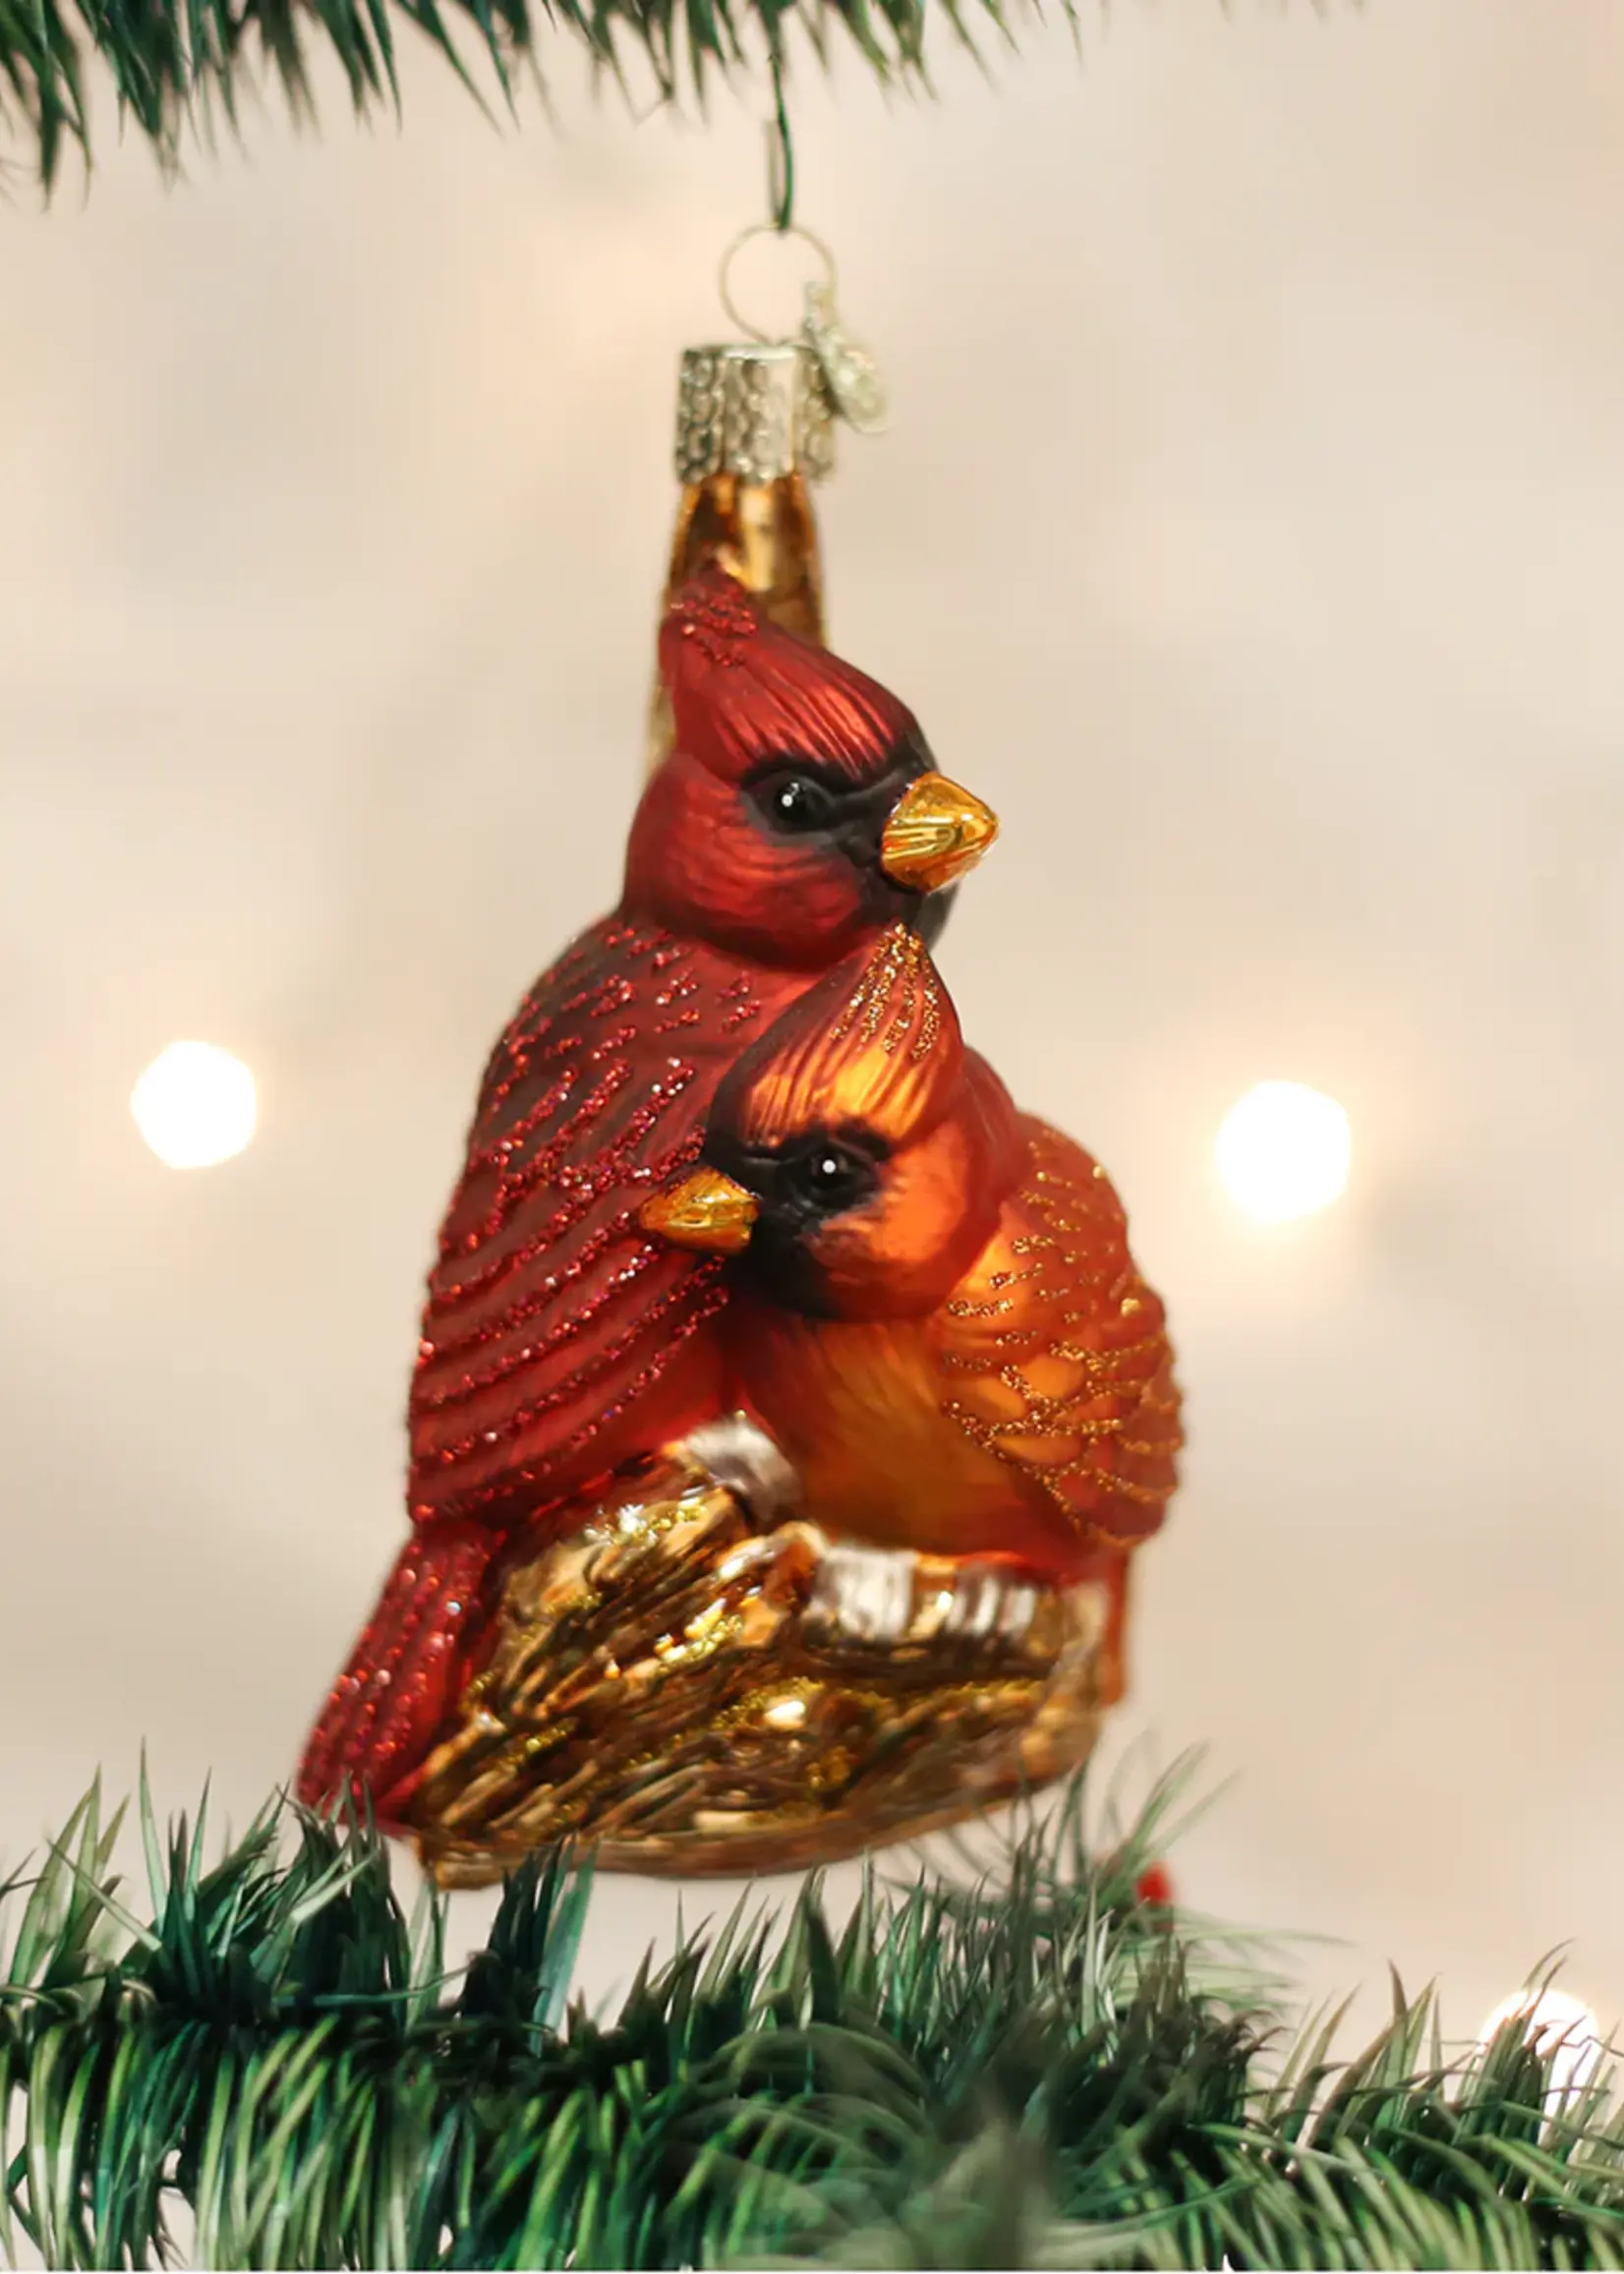 OLD WORLD CHRISTMAS PAIR OF CARDINALS ORNAMENT